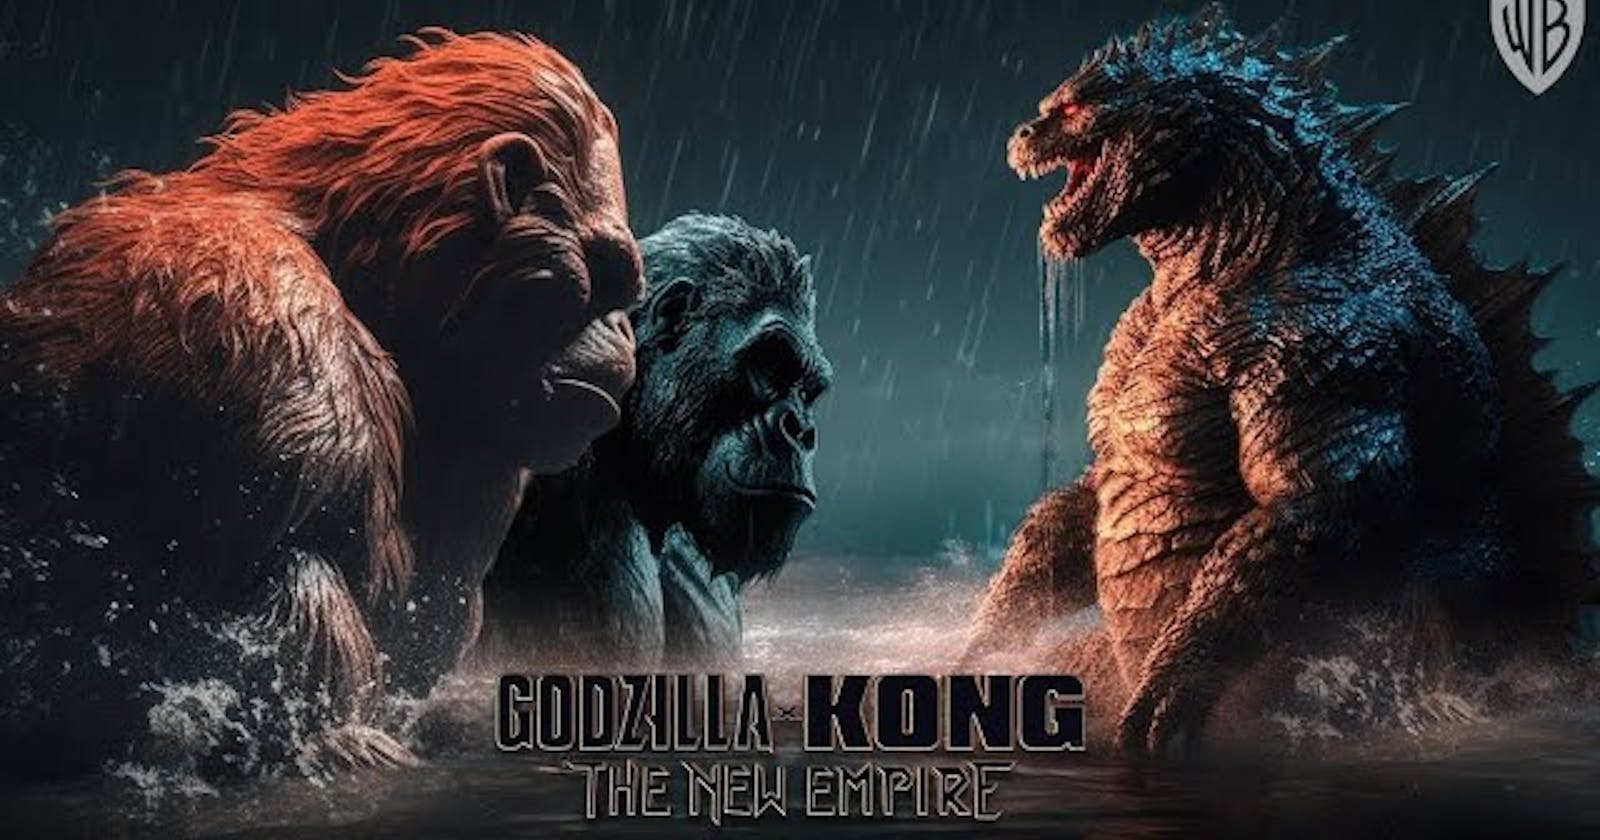 WHEN IS Godzilla x Kong: The New Empire COMING OUT?